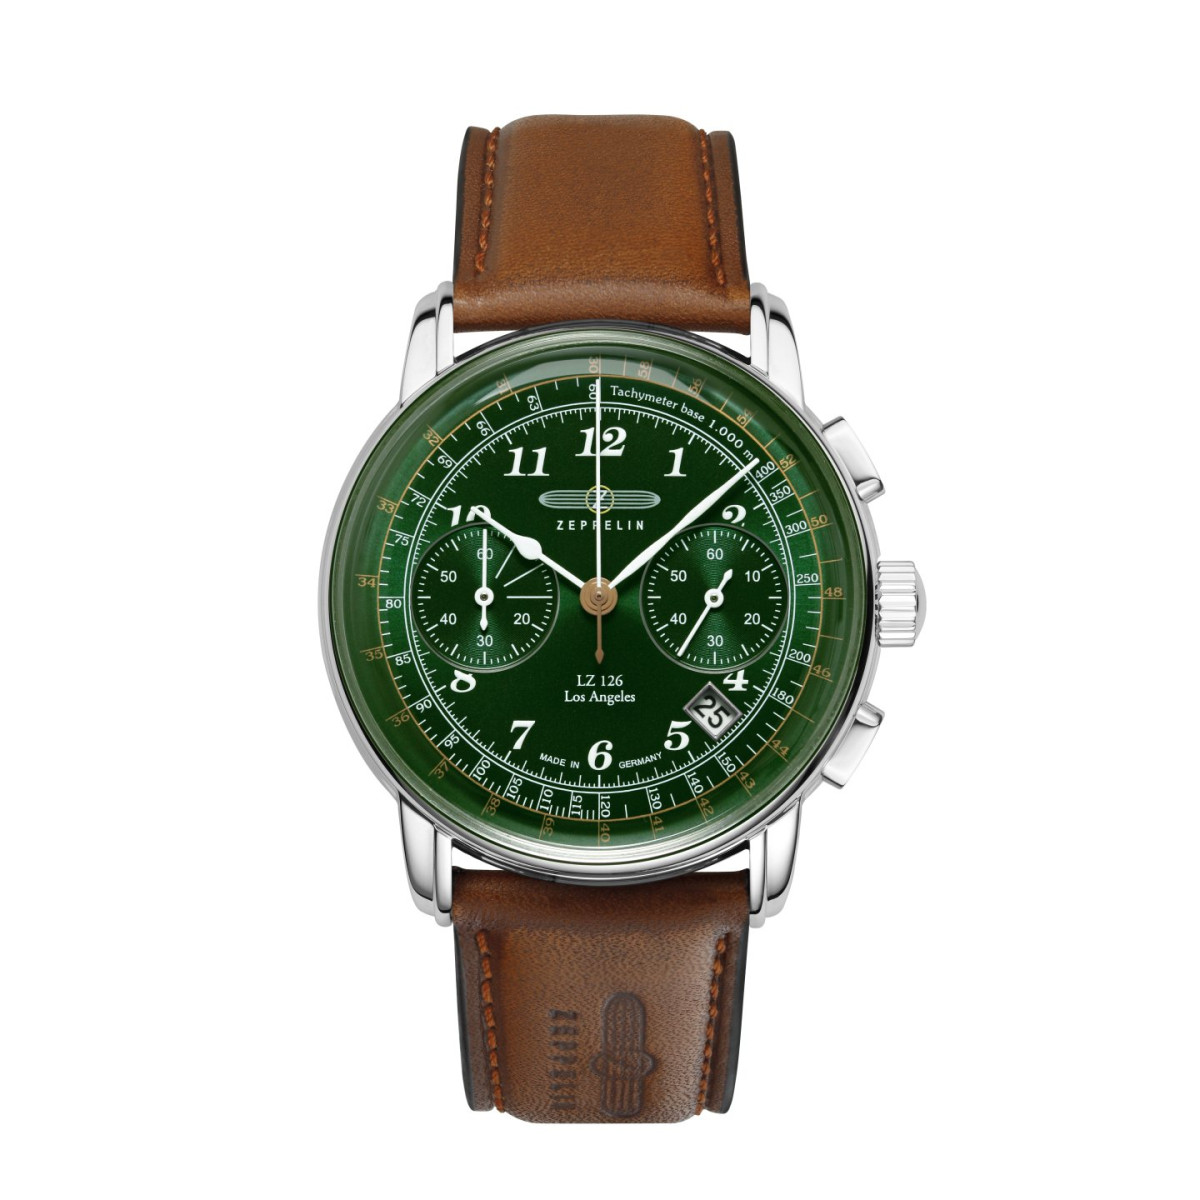 Zeppelin LZ126 Los Angeles Chronograph with leather strap